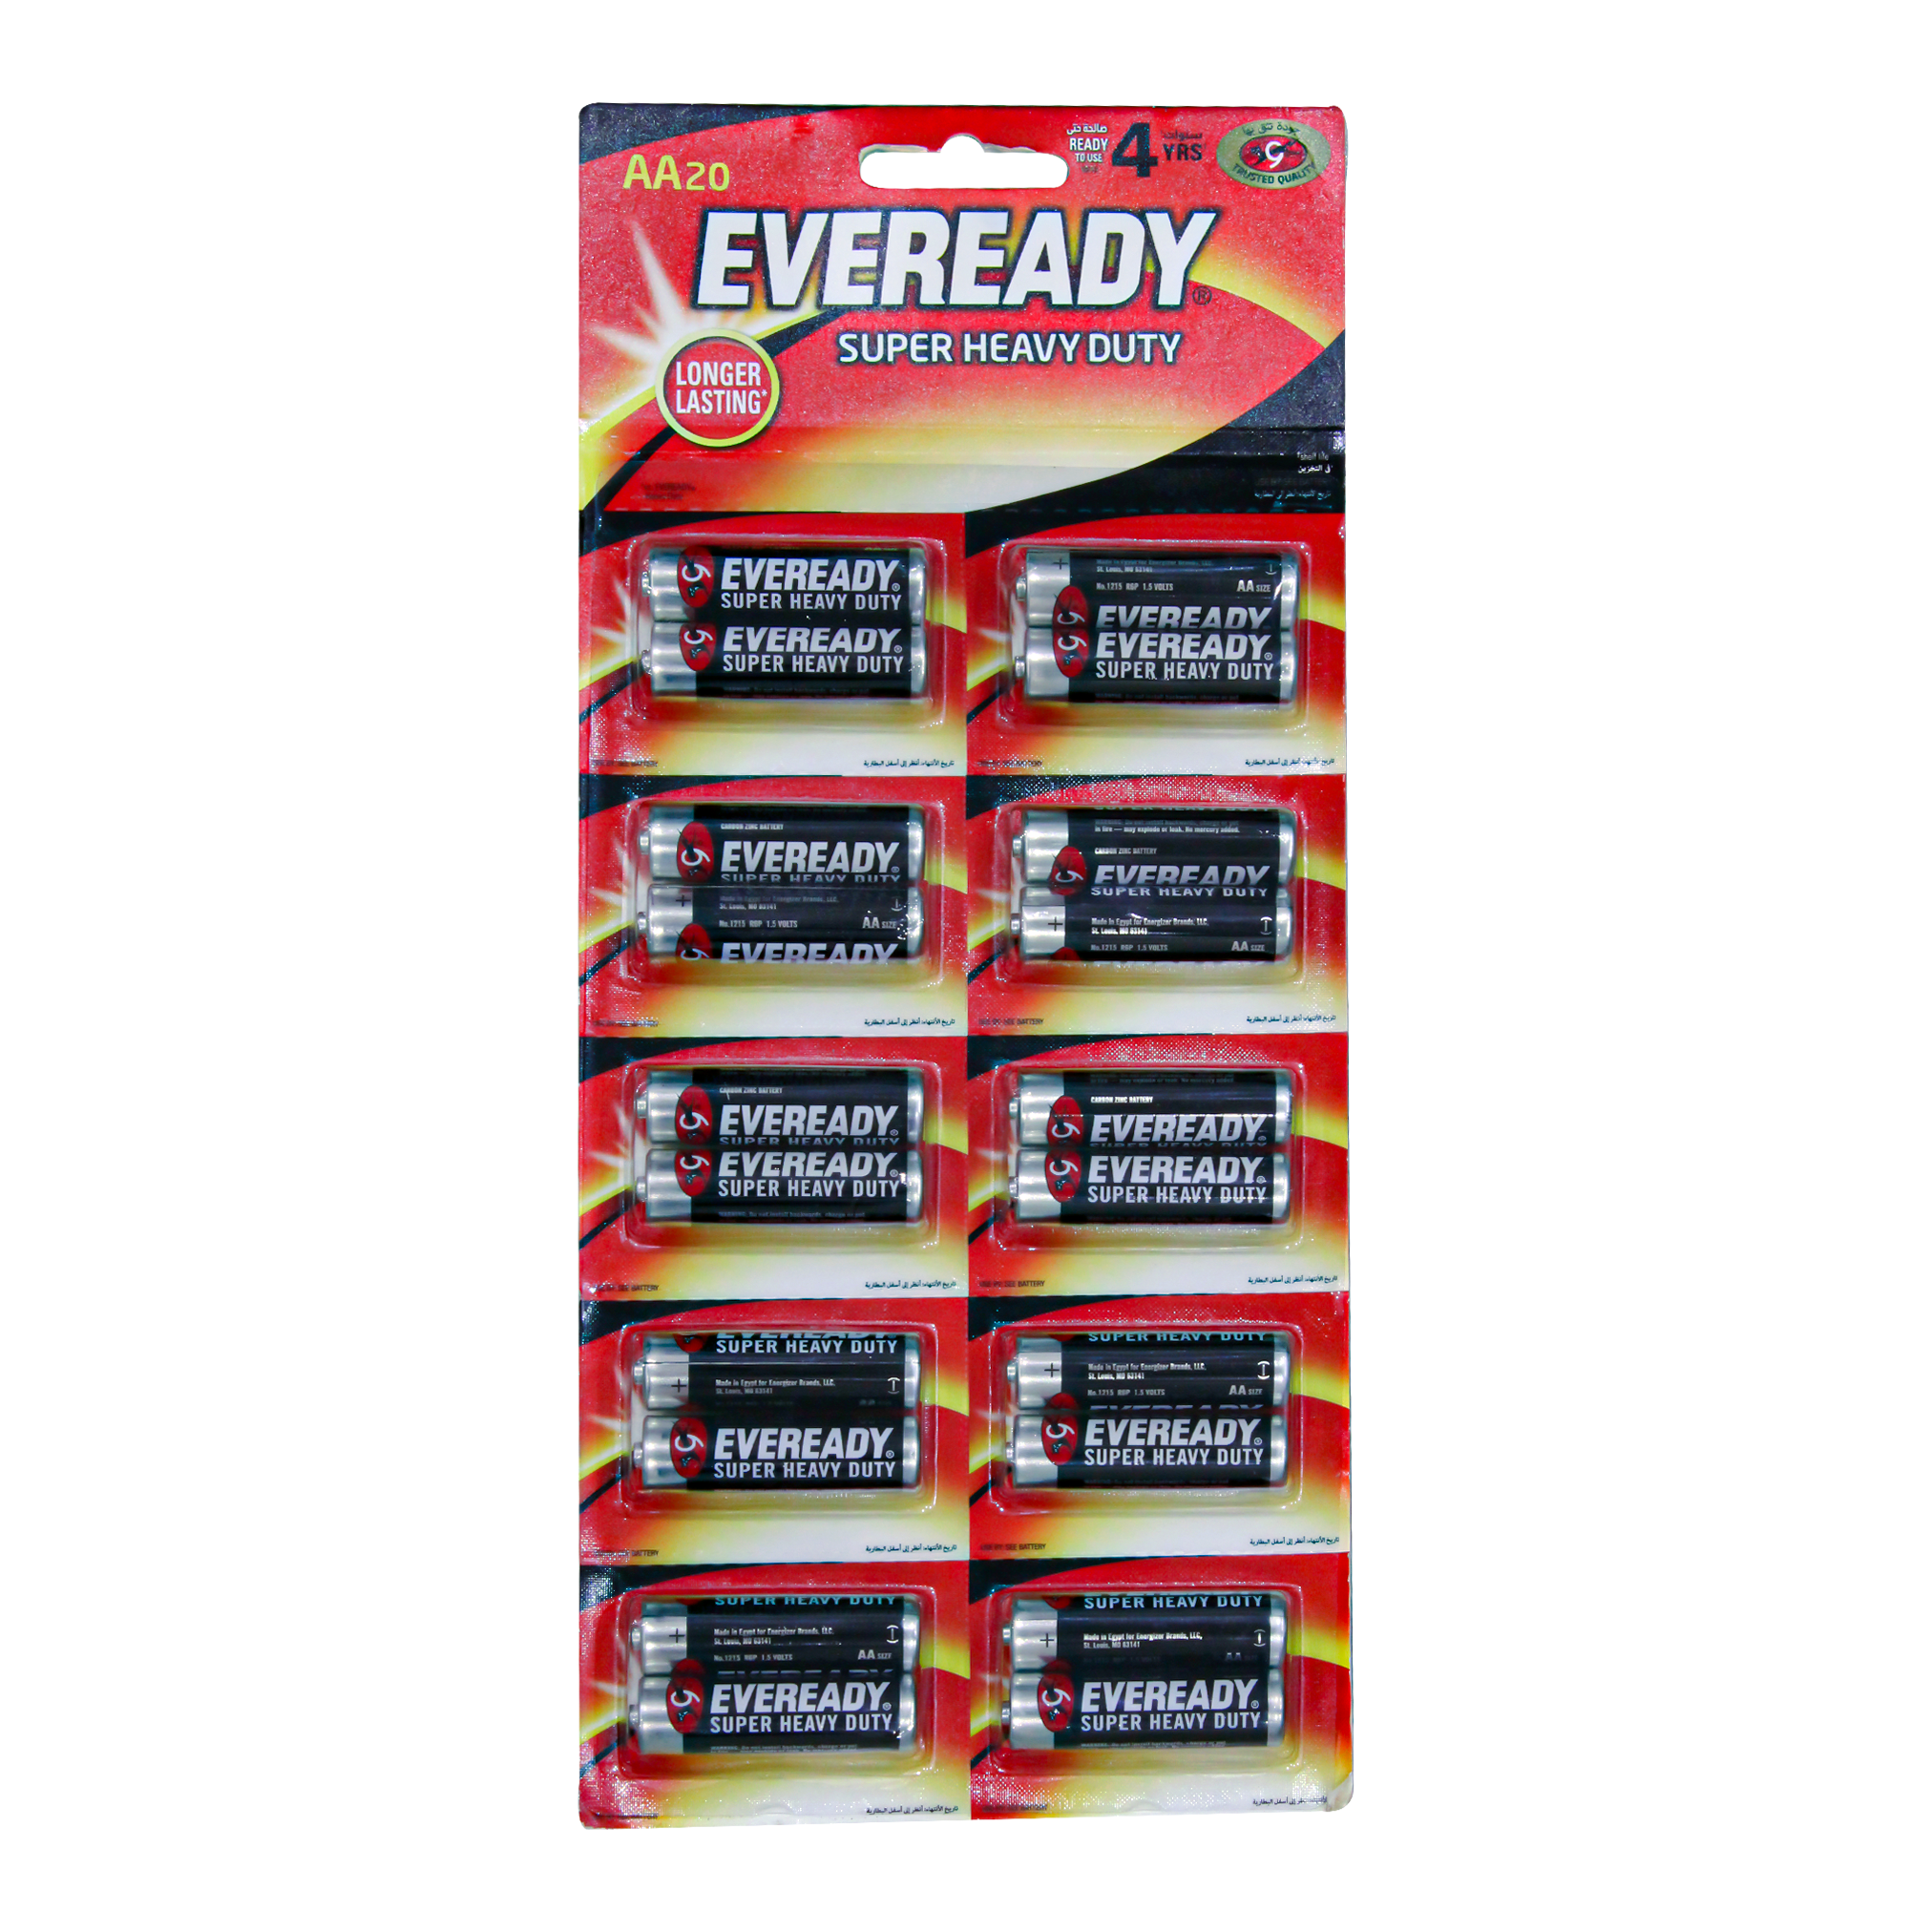 EVEREADY AA20 Extreme Batteries, Super Heavy Duty, 2 pieces ,Black , (set of 10 )